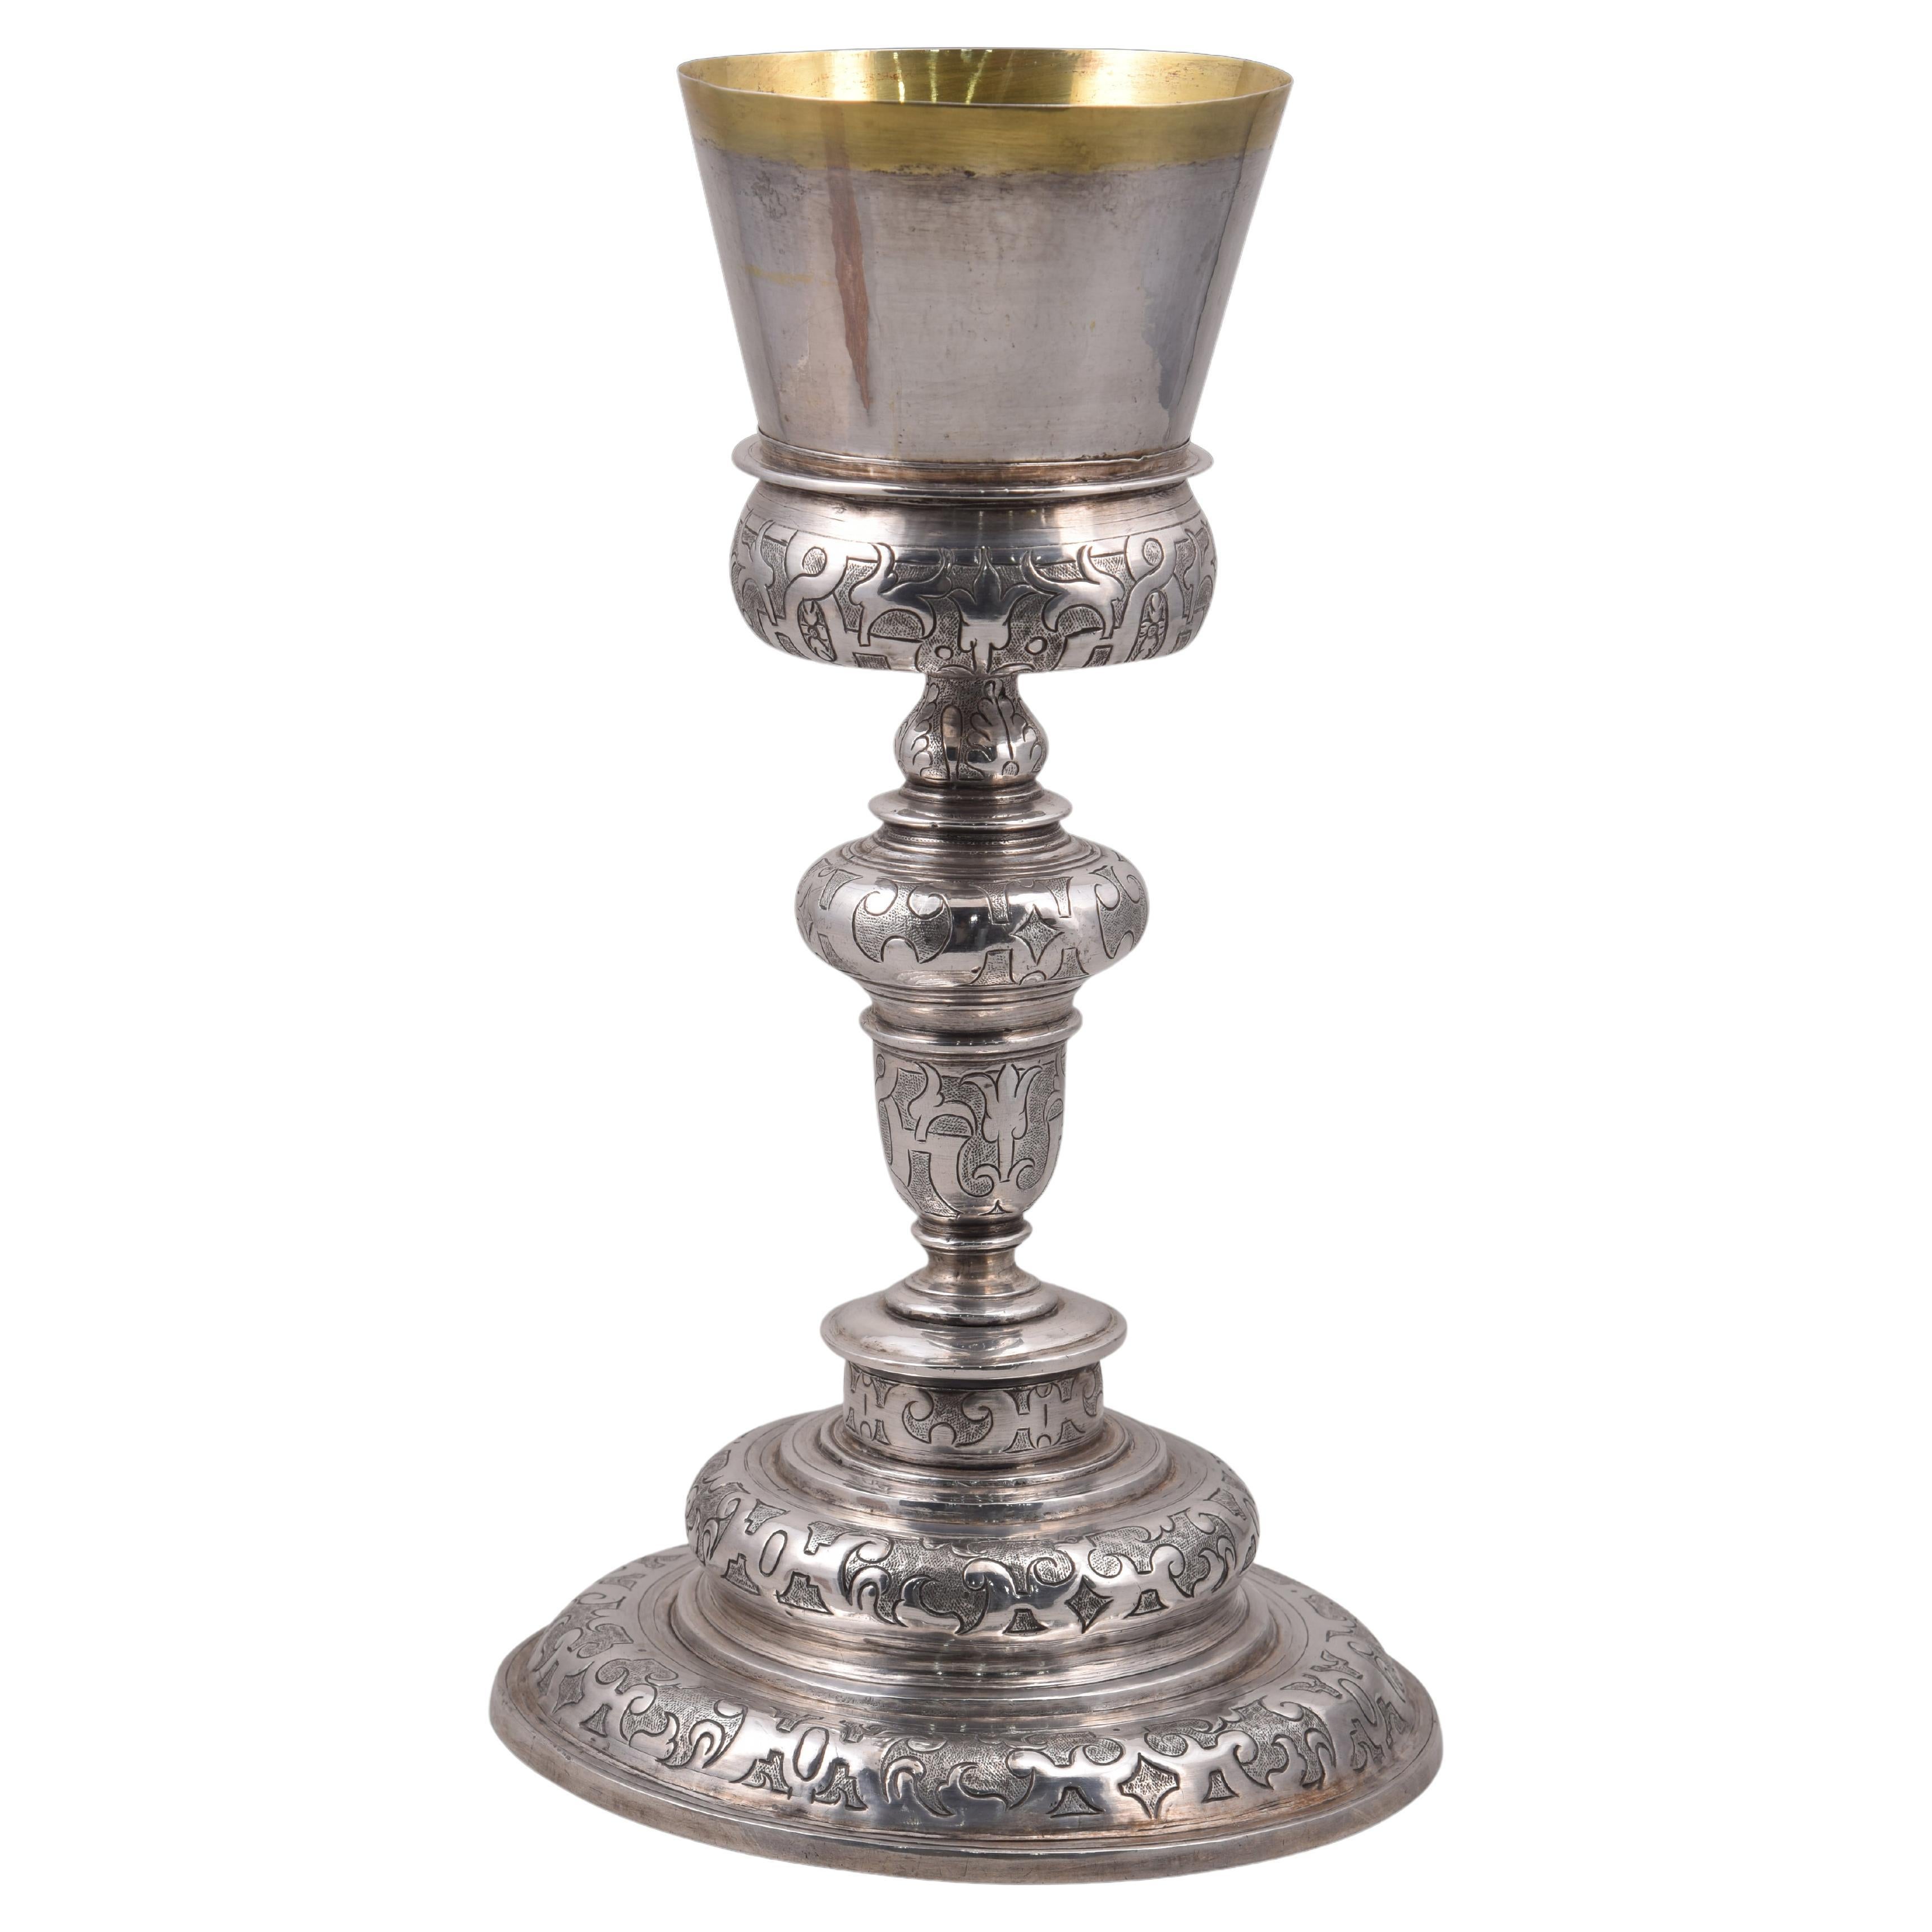 Solid silver chalice. Spain, 17th century